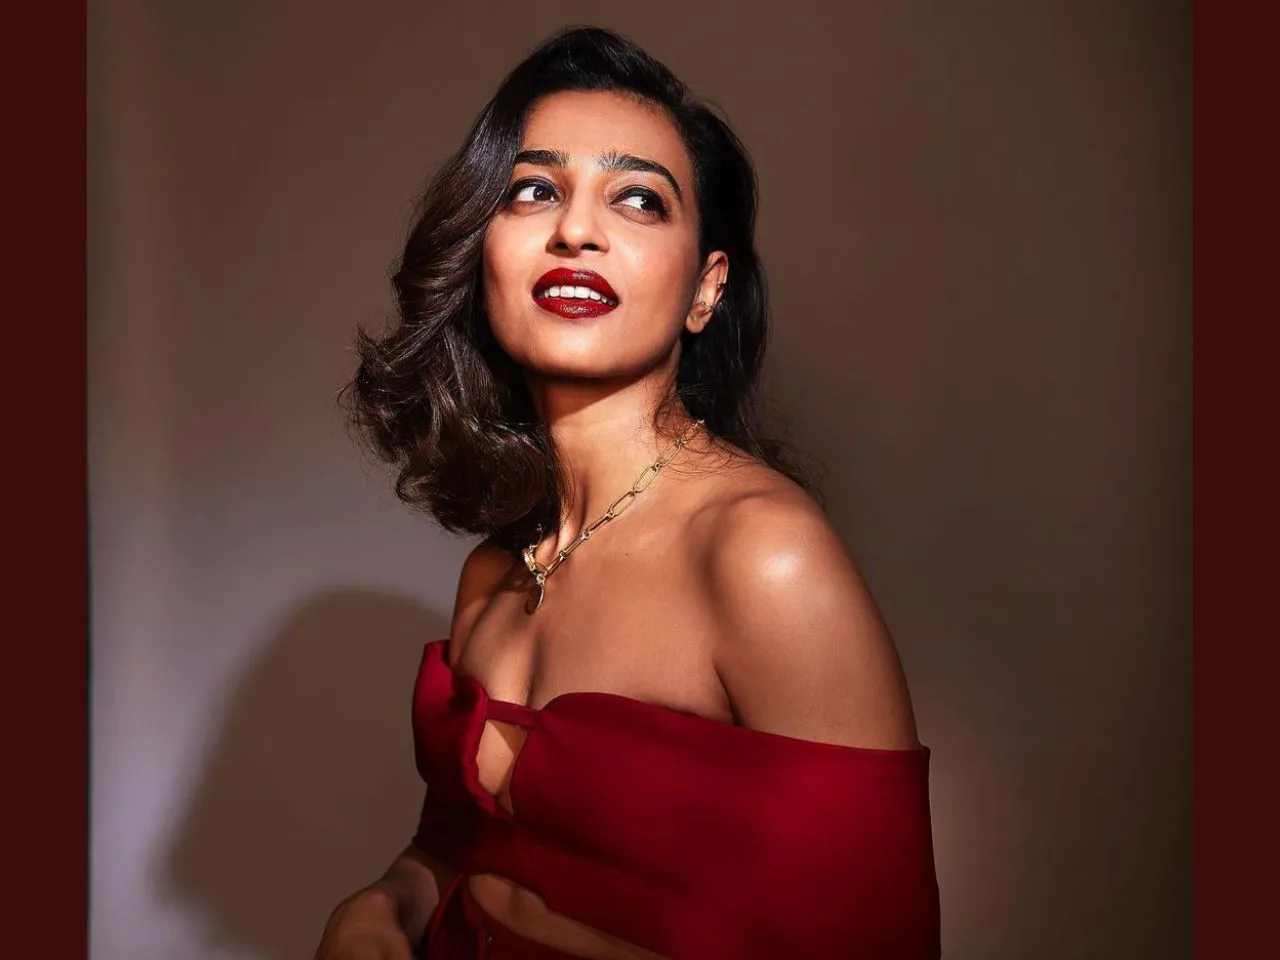 5 roles that prove that Radhika Apte is a talented yet underrated actress